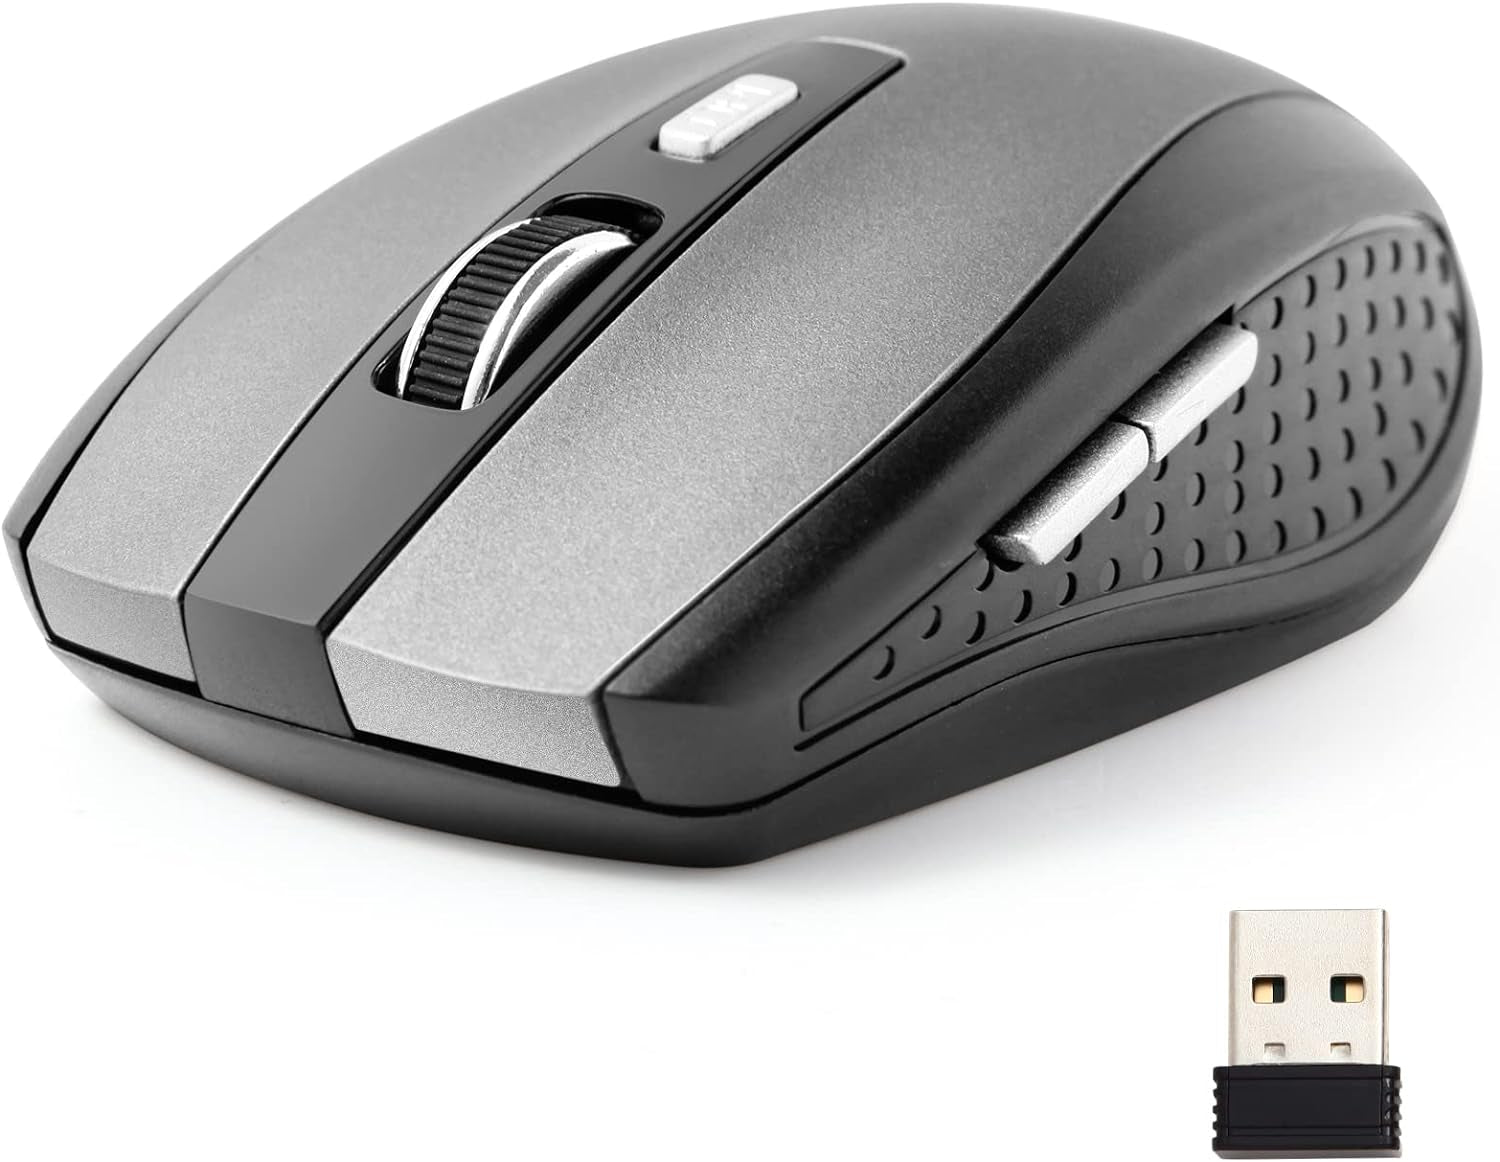 Ultra Scroll Wireless Mouse, 2.4Ghz Wireless Mouse Computer Mouse 1200DPI,6 Buttons with Nano Receiver for Laptop,Pc,Chromebook,Computer,Notebook,Office (Grey)